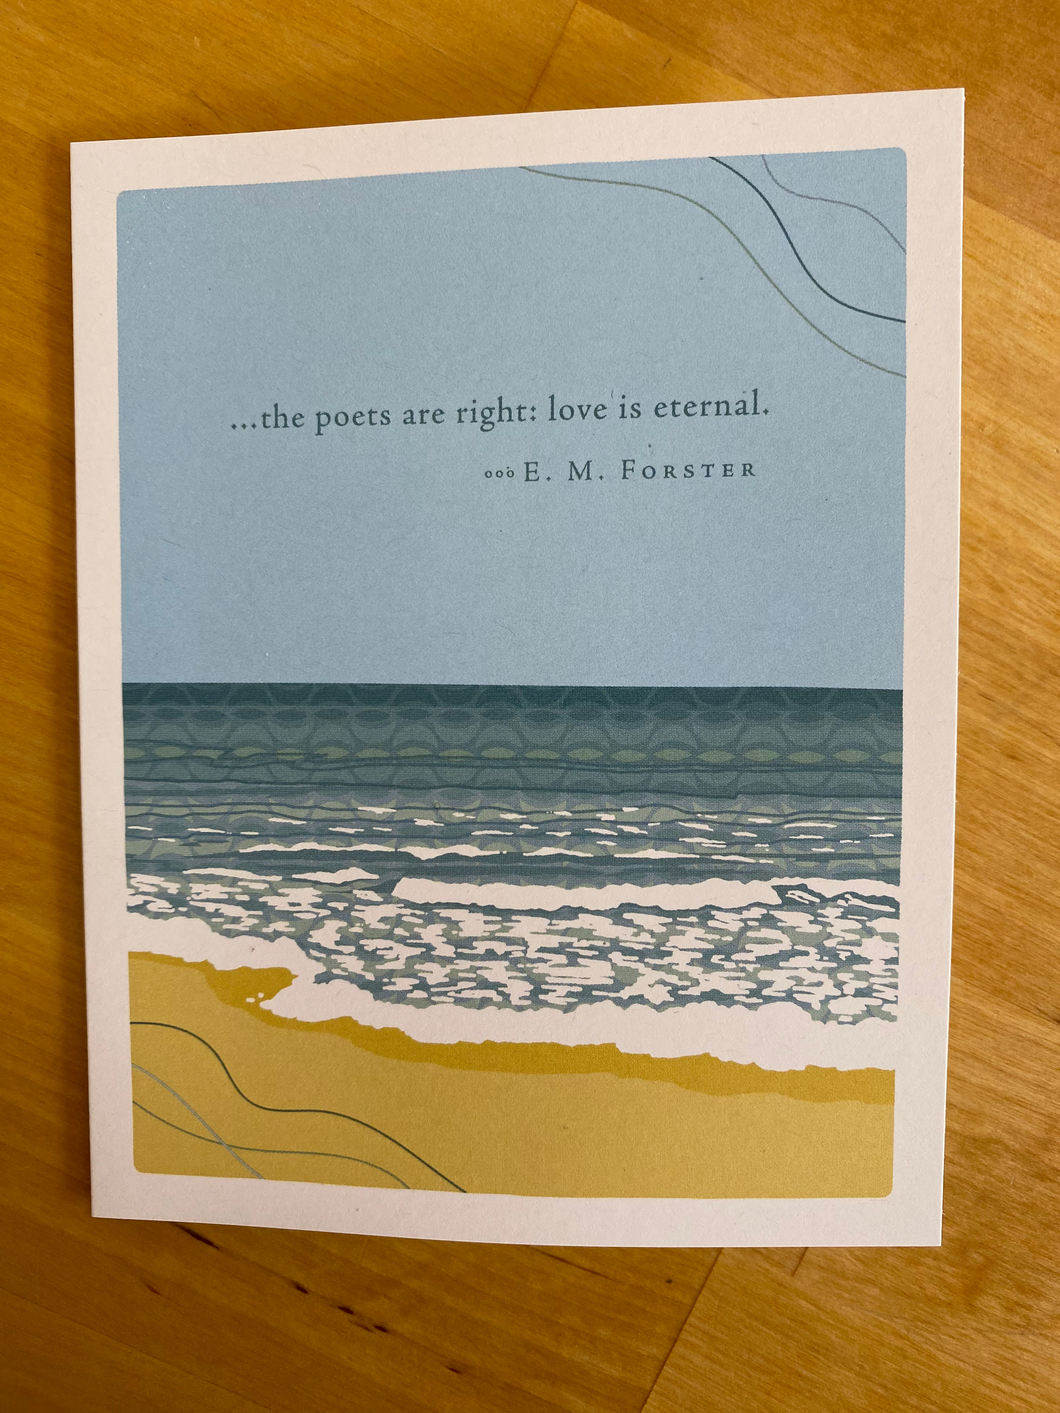 Product Image : Sympathy Card - ...the poets are right : love is eternal.  E.M. Forster